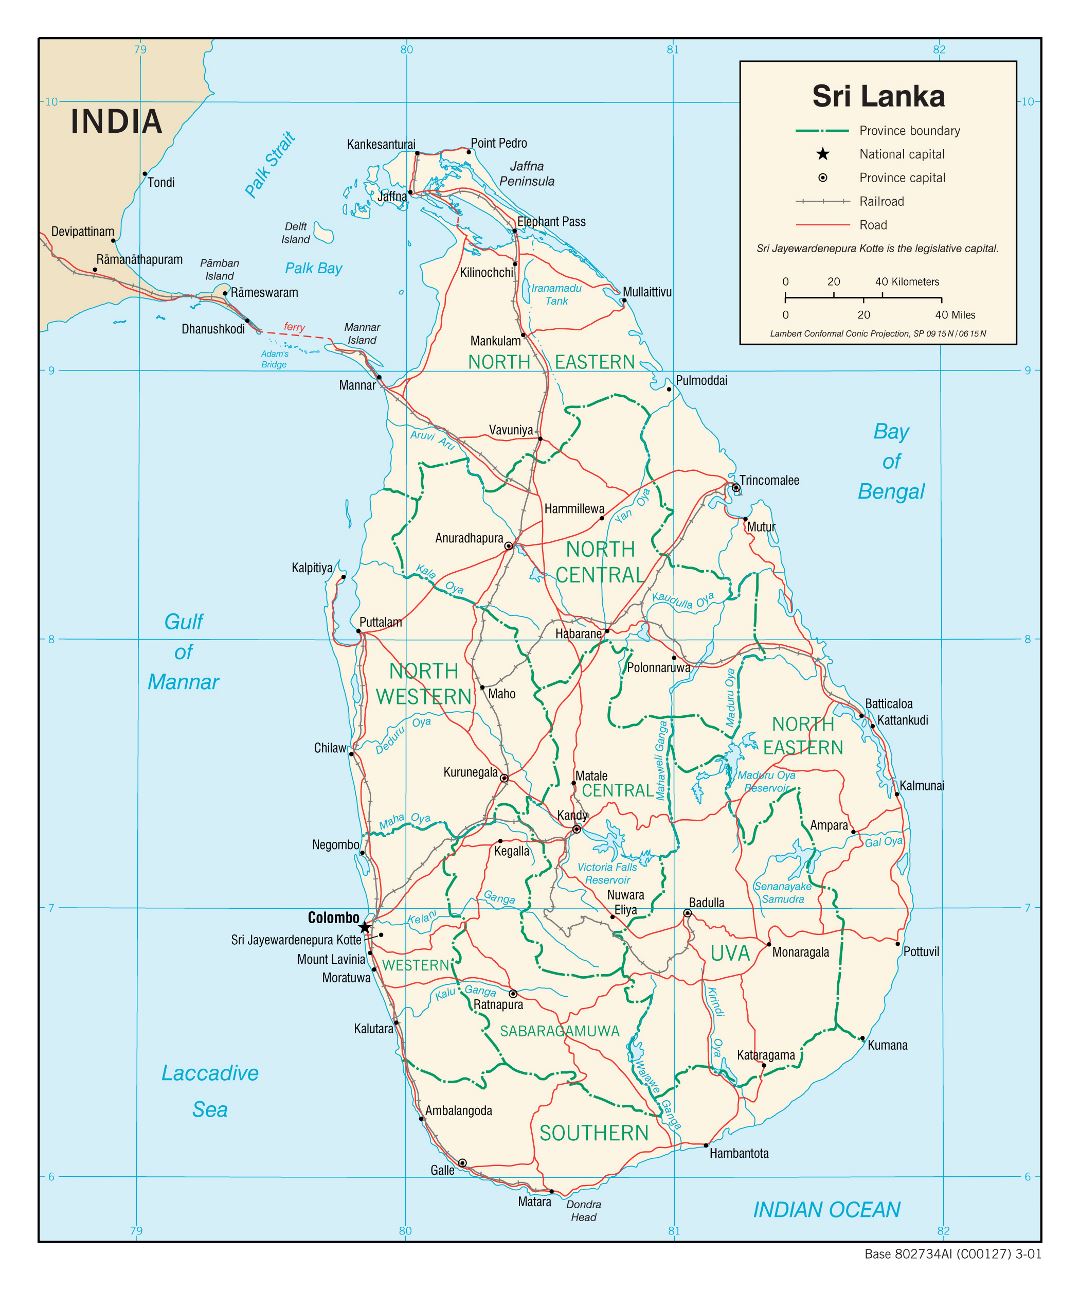 Large political and administrative map of Sri Lanka with roads, railroads and major cities - 2001